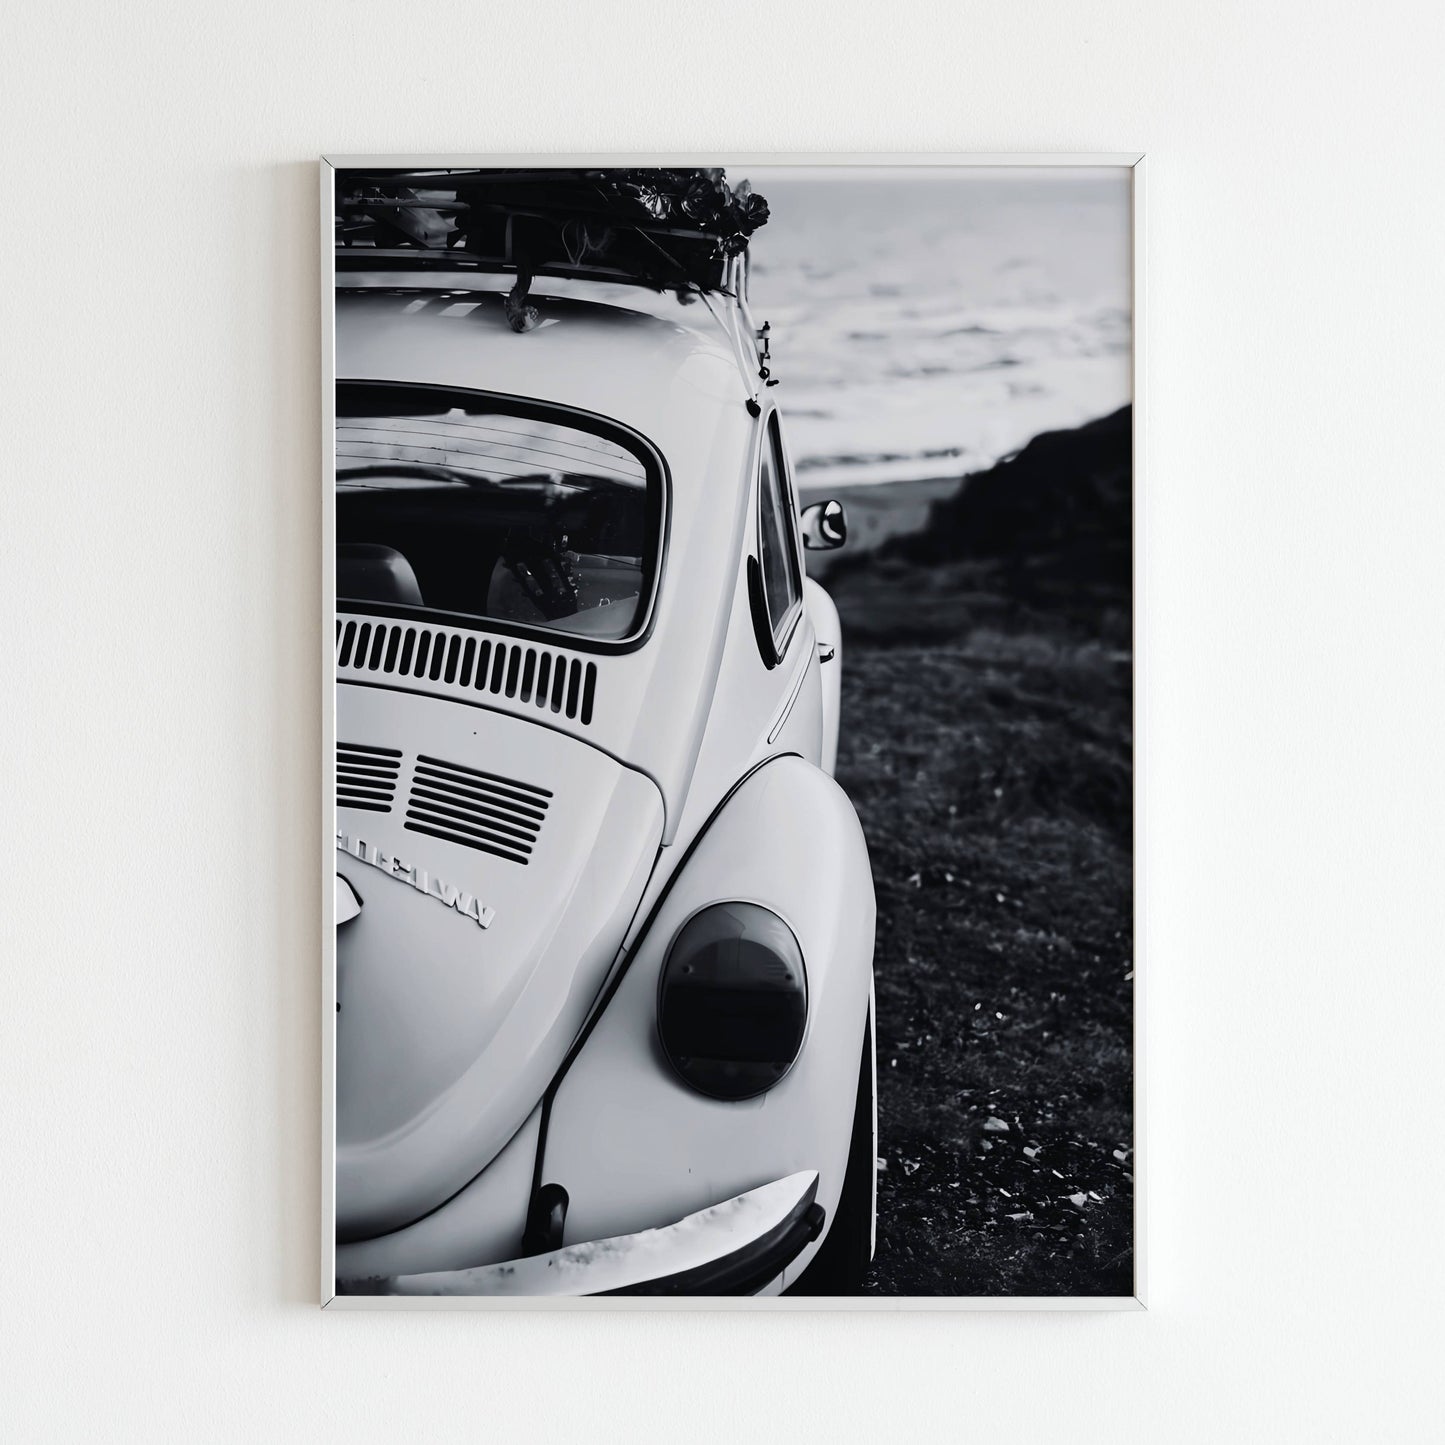 Car by the beach - Printed Wall Art / Poster. This captivating poster captures the feeling of a beach getaway. Arrives ready to hang.